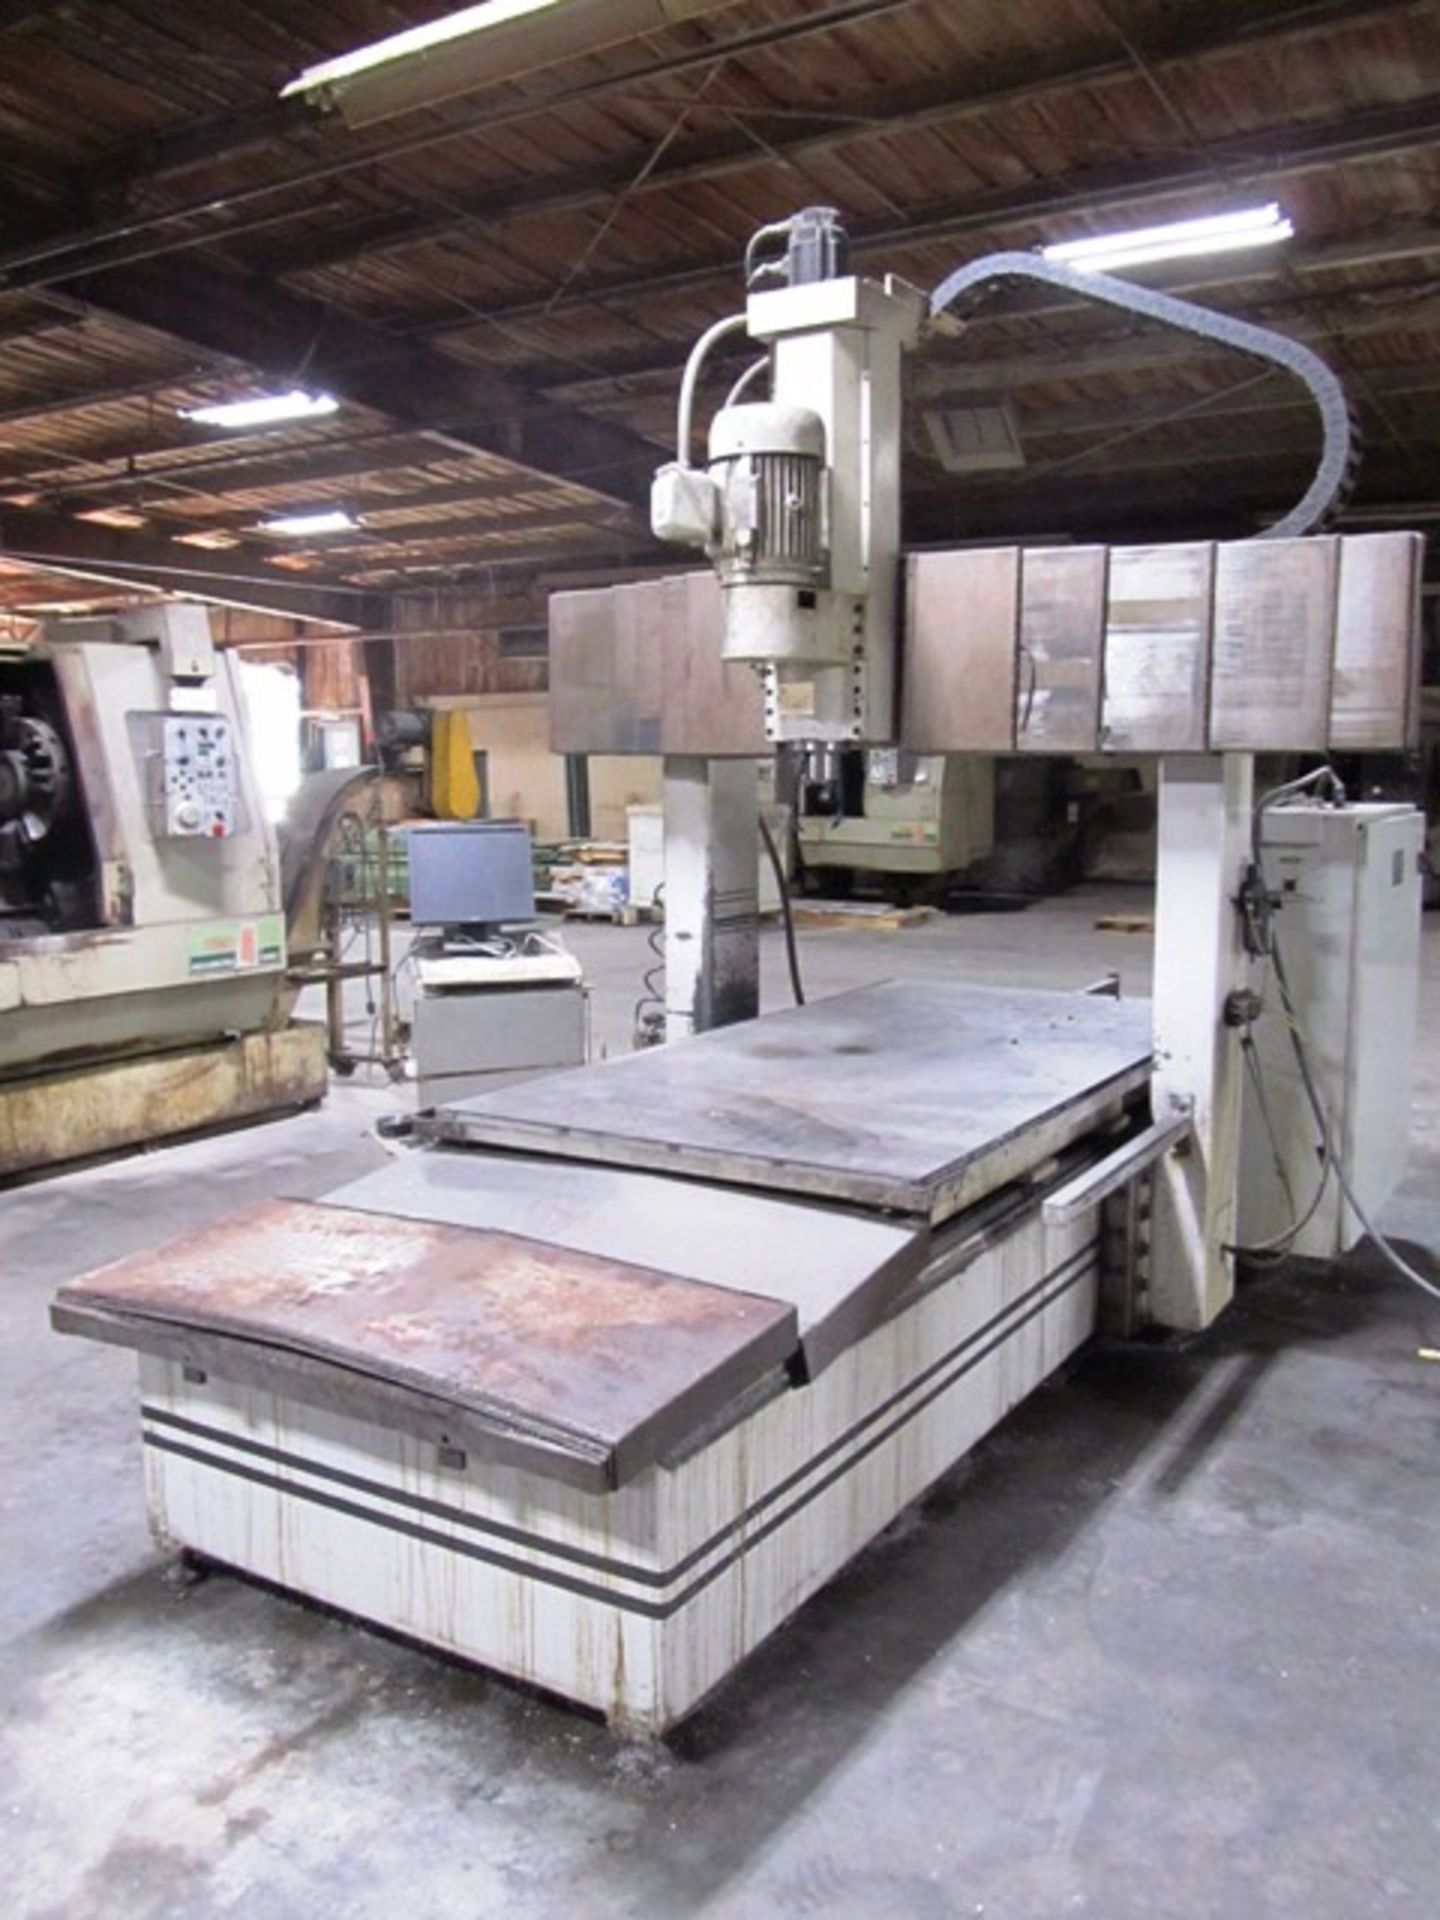 Milltronics BR50 CNC Vertical Bridge Mill with 48'' x 98'' Table, #40 Taper Spindle, 50'' X-Axis - Image 2 of 3